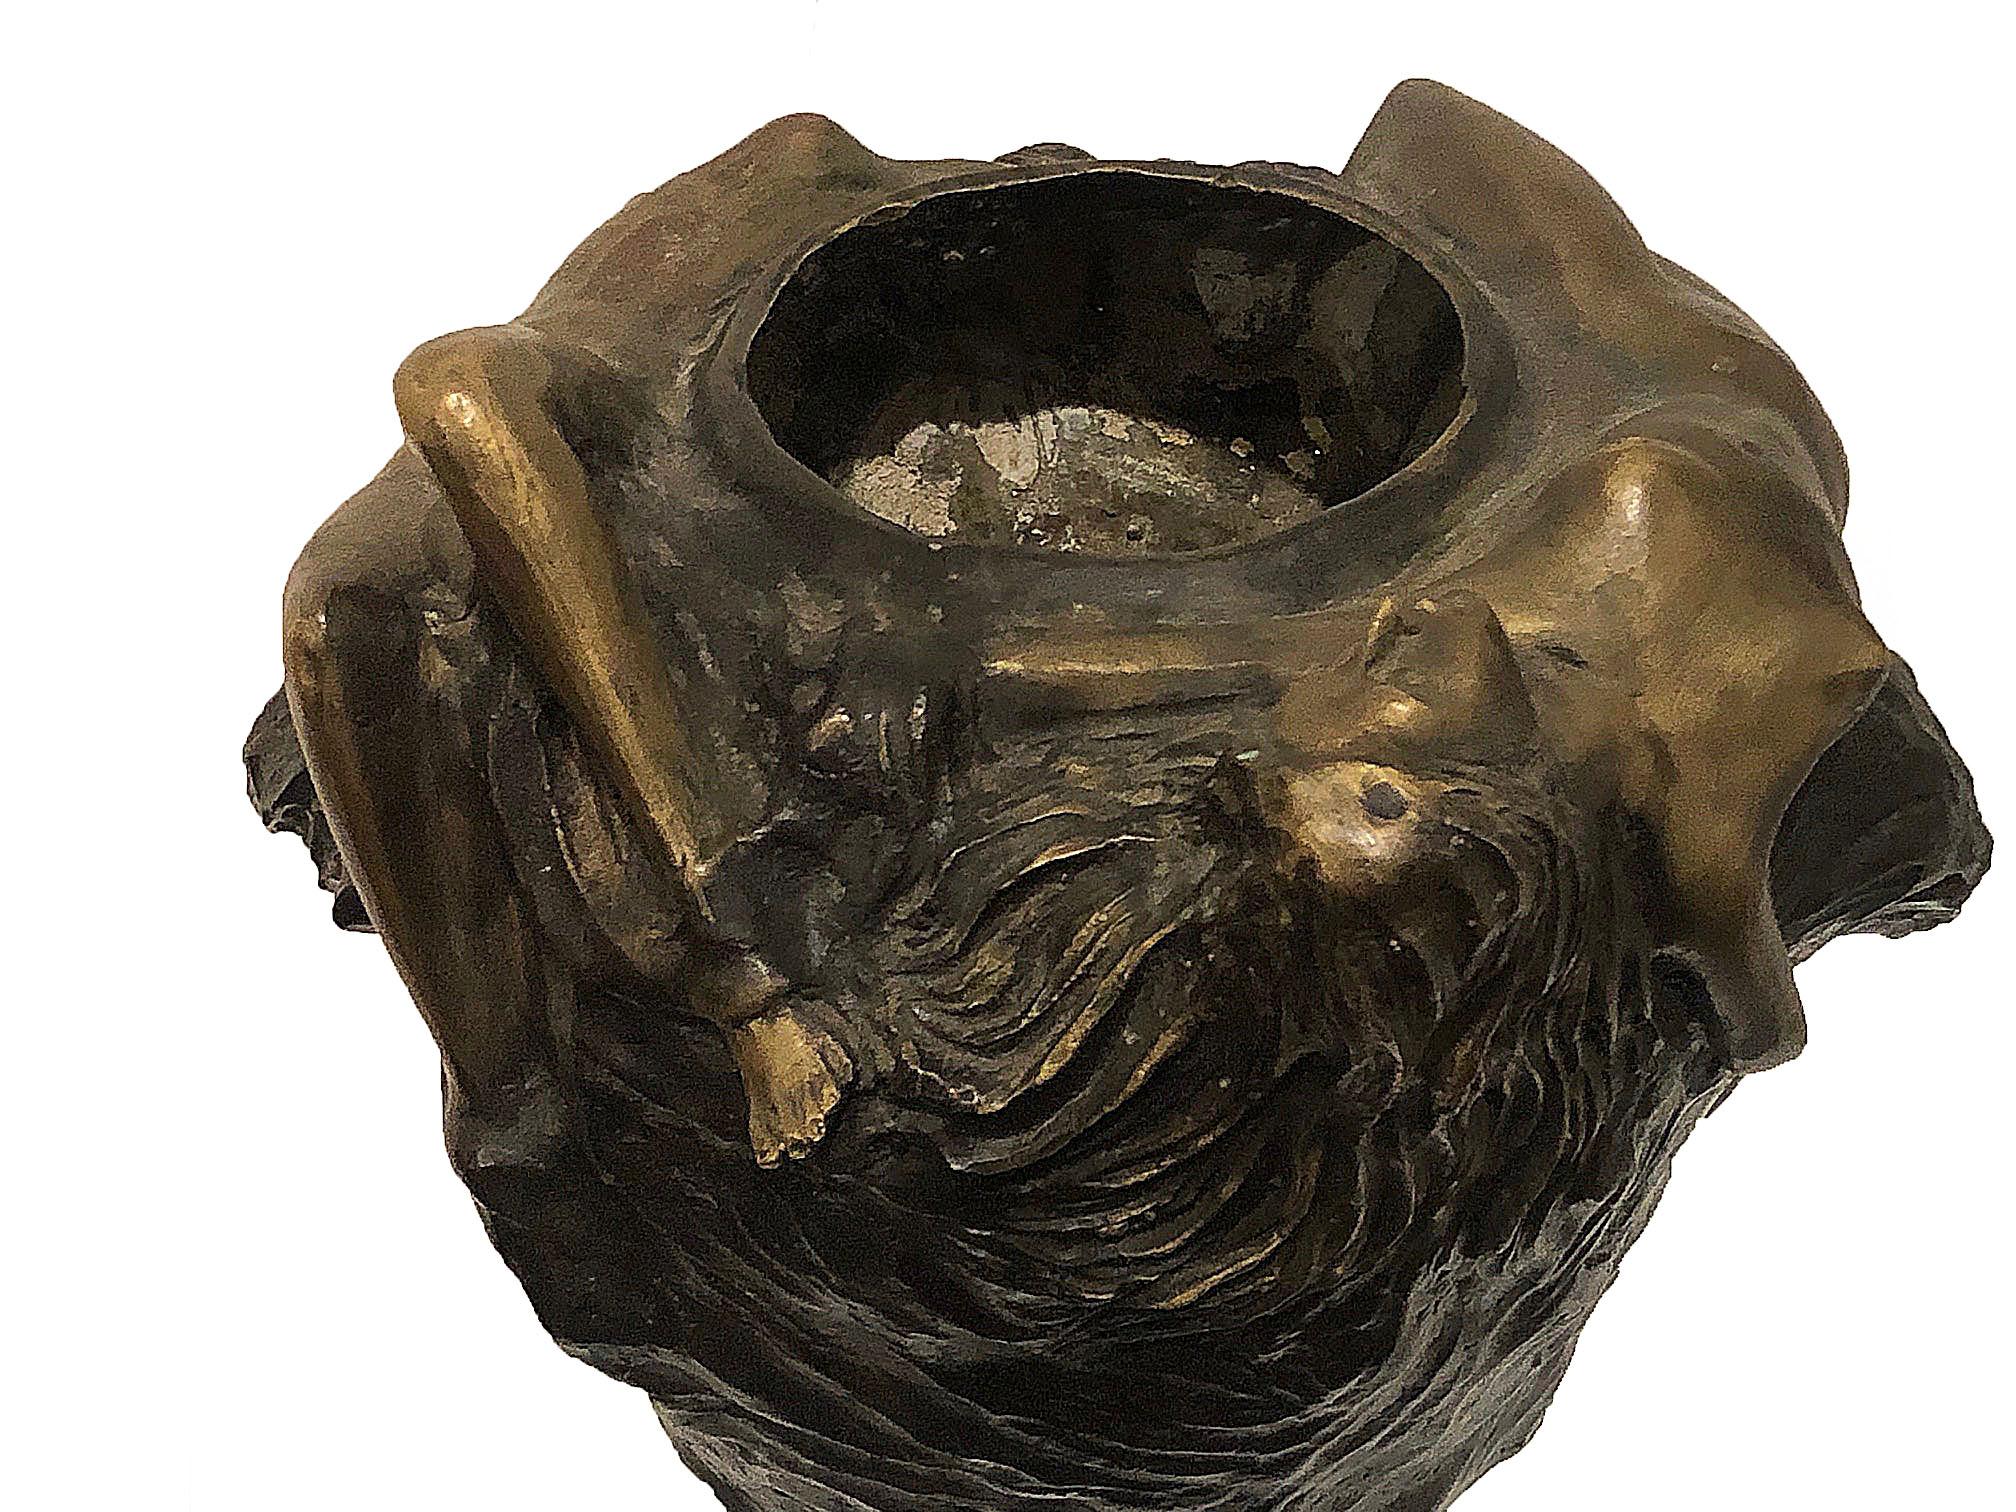 Figurative cast bronze cachepot. This cachepot depicts two nude female figures floating along the top, as though they are immersed in water. Their hair is long and floats on the sides of the planter, giving it much texture.

This piece should be